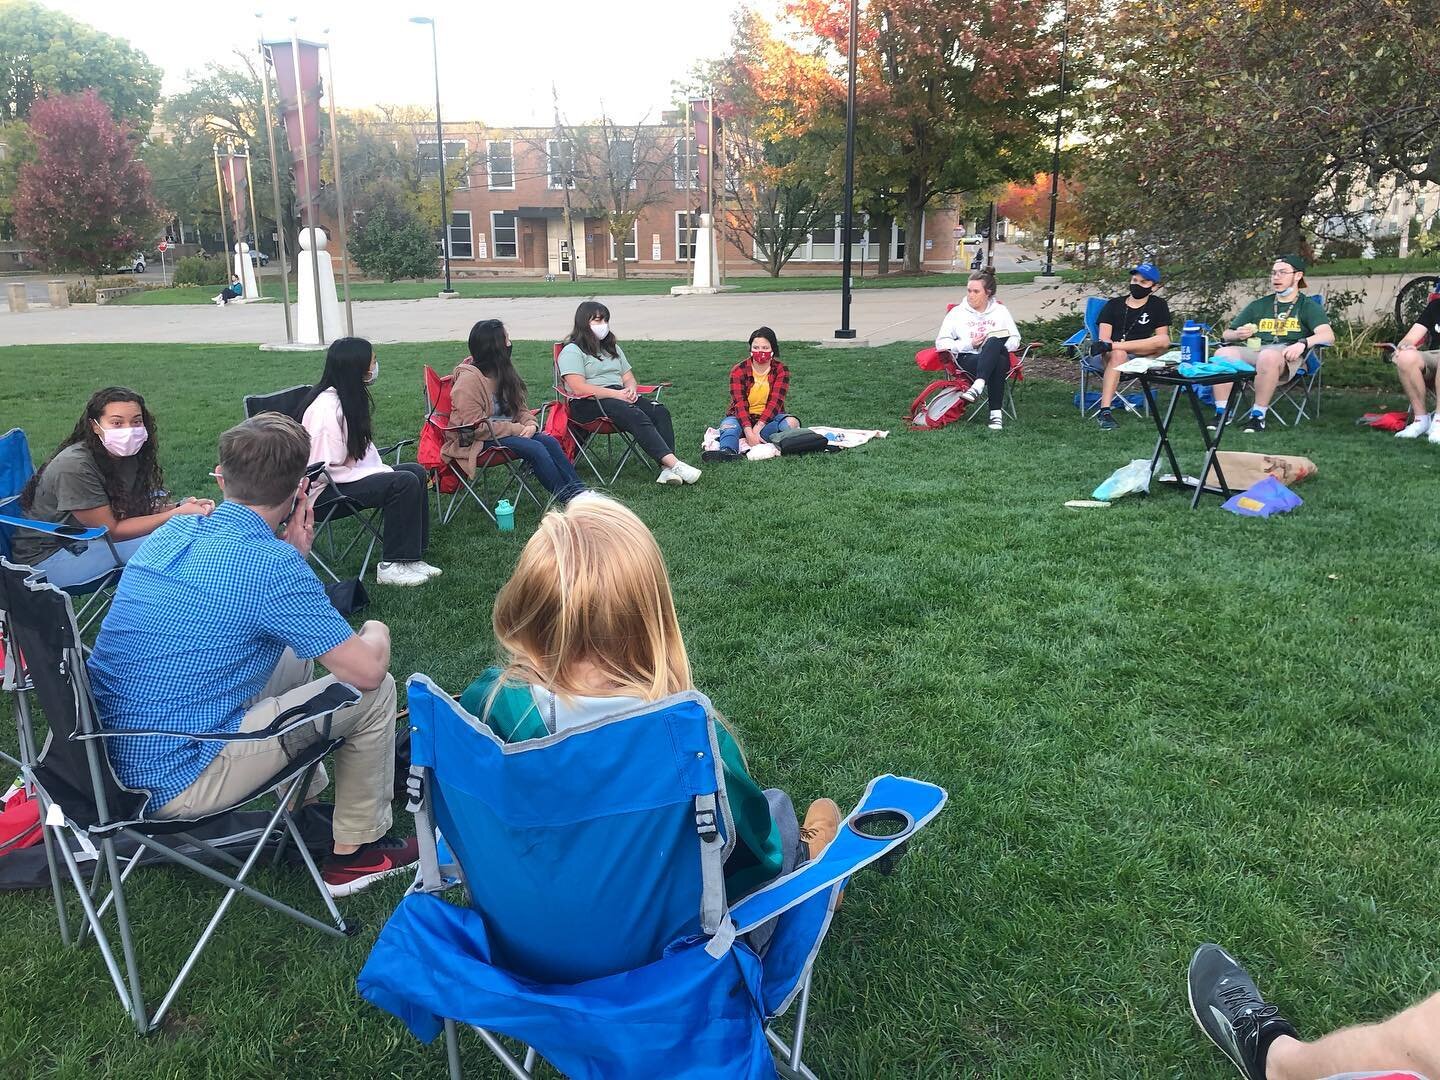 Remember when we used to be able to have bible talk outside?? Good times... reminiscing about warmer weather while the country turns into an ice cube! 🥶🥶🥶 Join us inside from the comfort of zoom for bible talk tonight! Message us for the link!